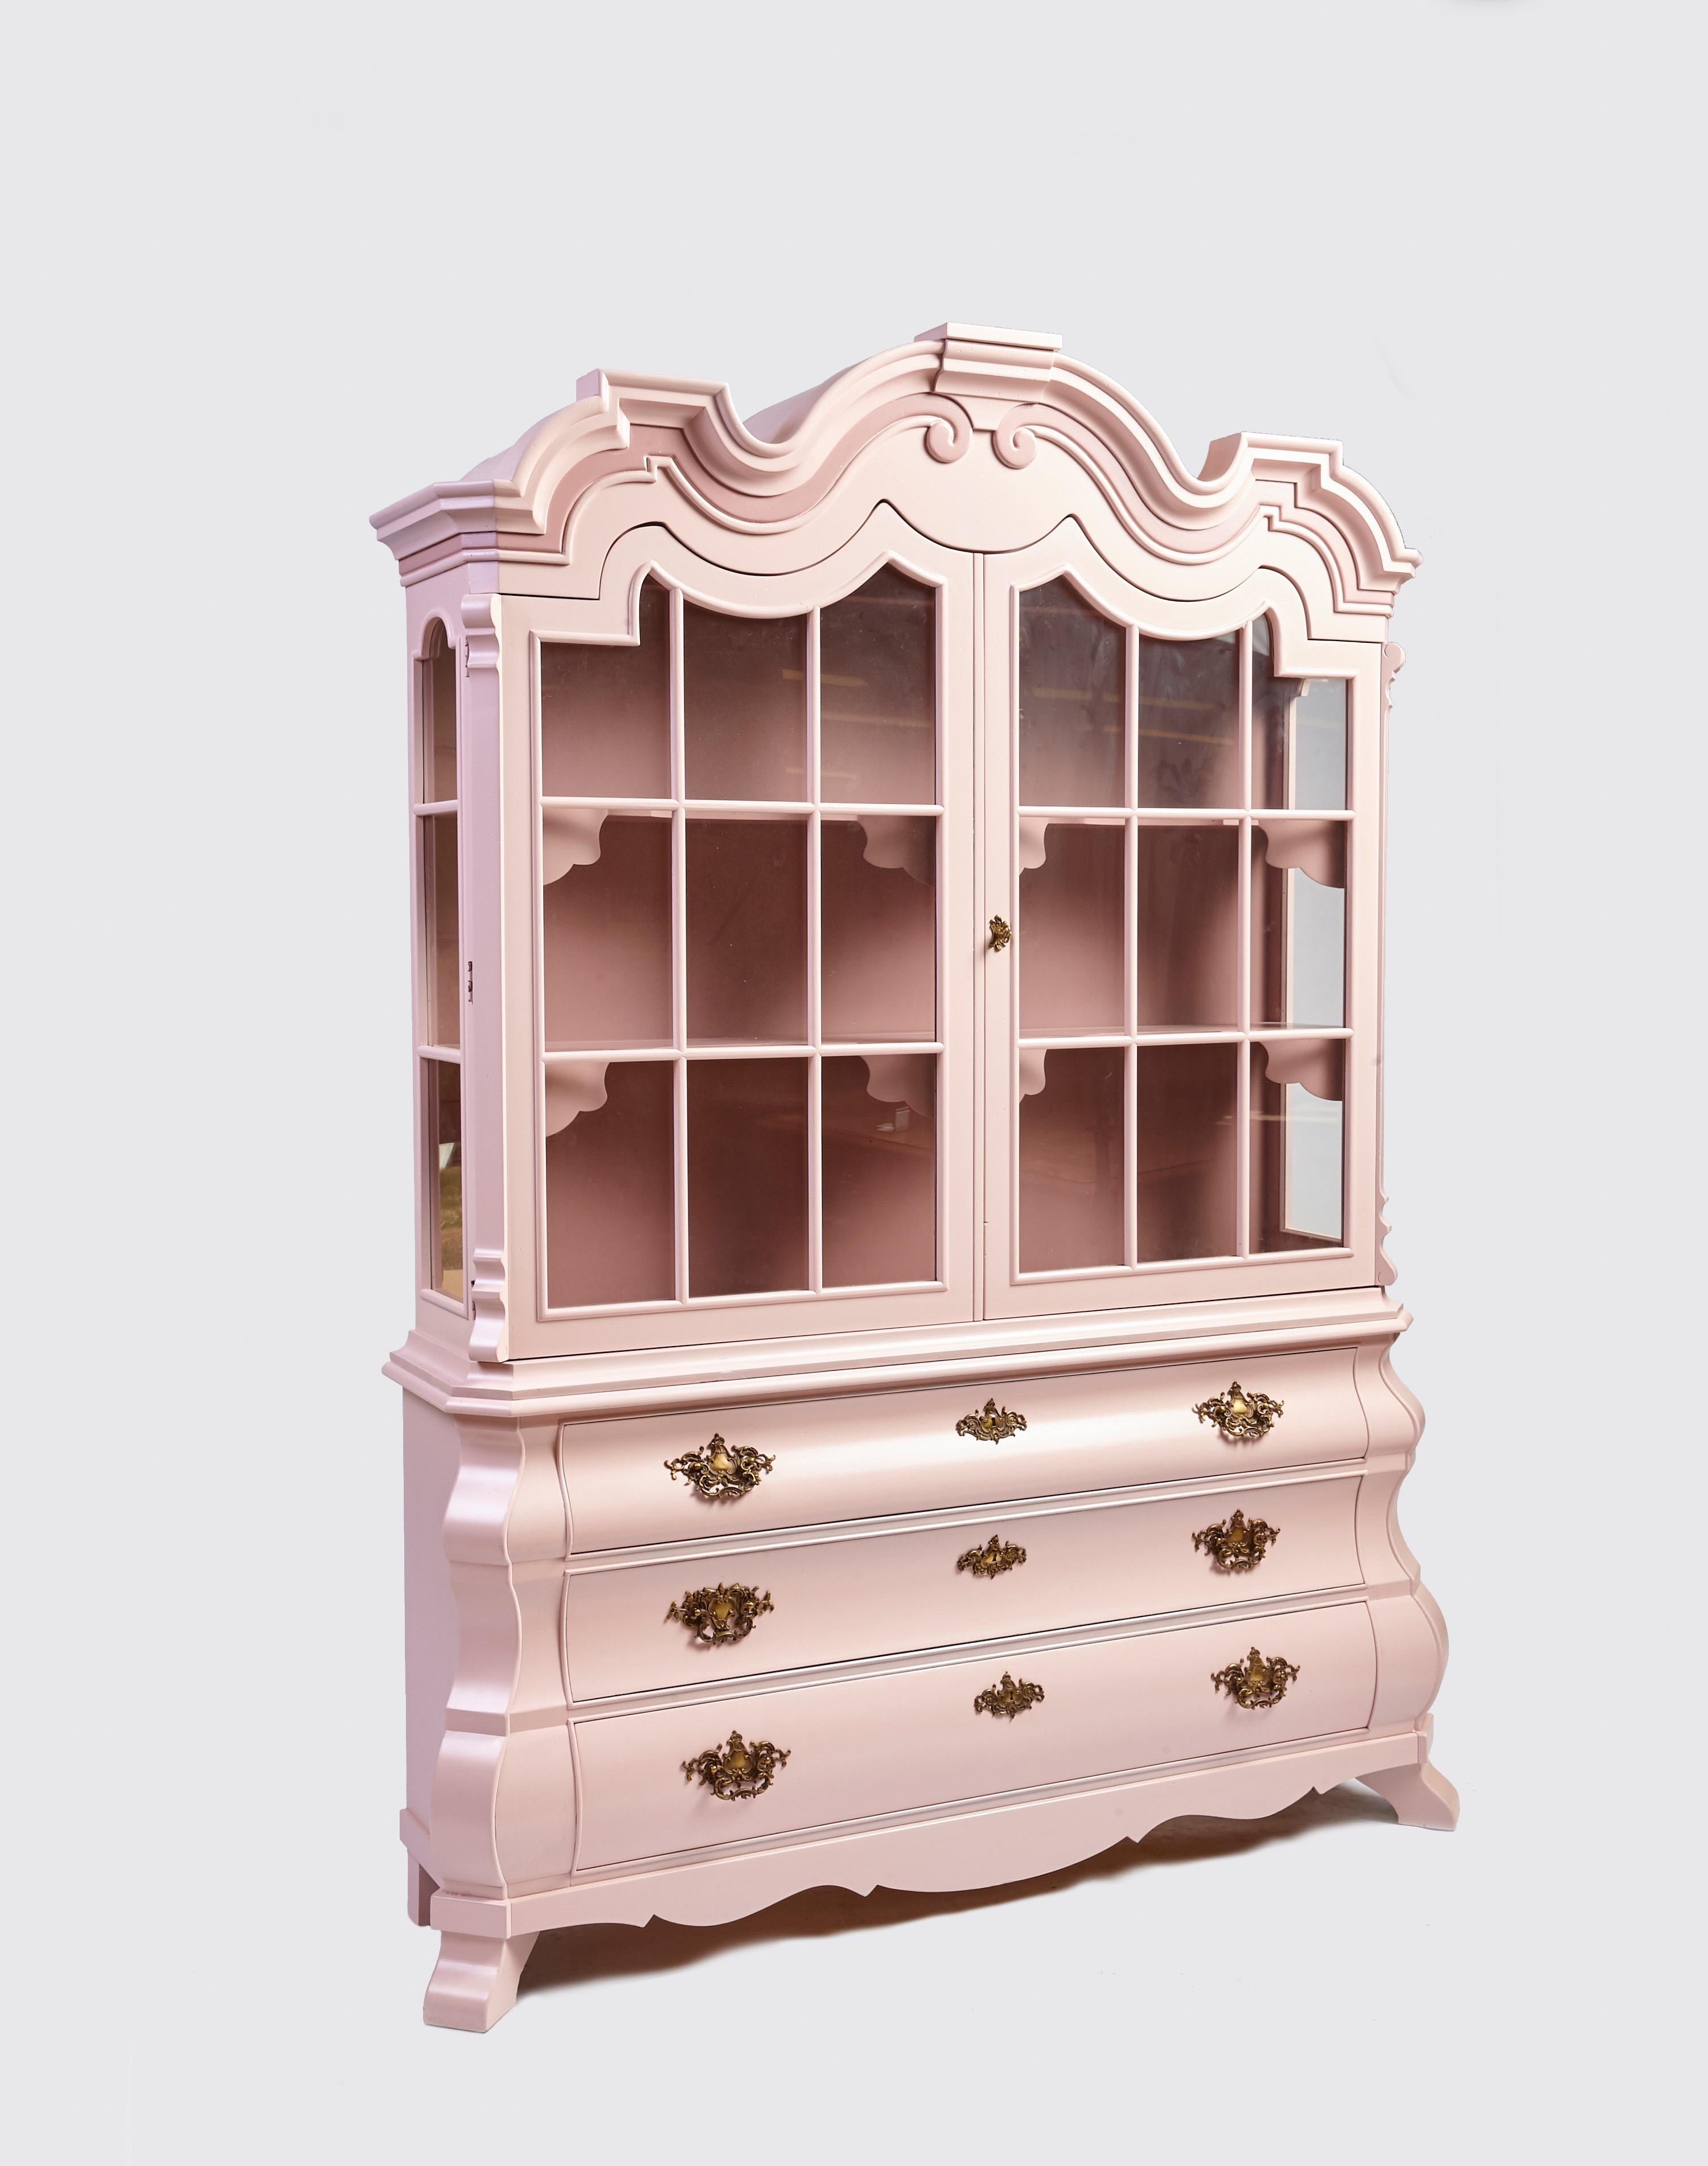 Dorothy Draper Viennese collection China cabinet designed for Henredon, circa 1963. Shown in pink lacquer, this particular one is sold but we have another one available for custom refinishing in any color combination desired (please allow 4 to 5